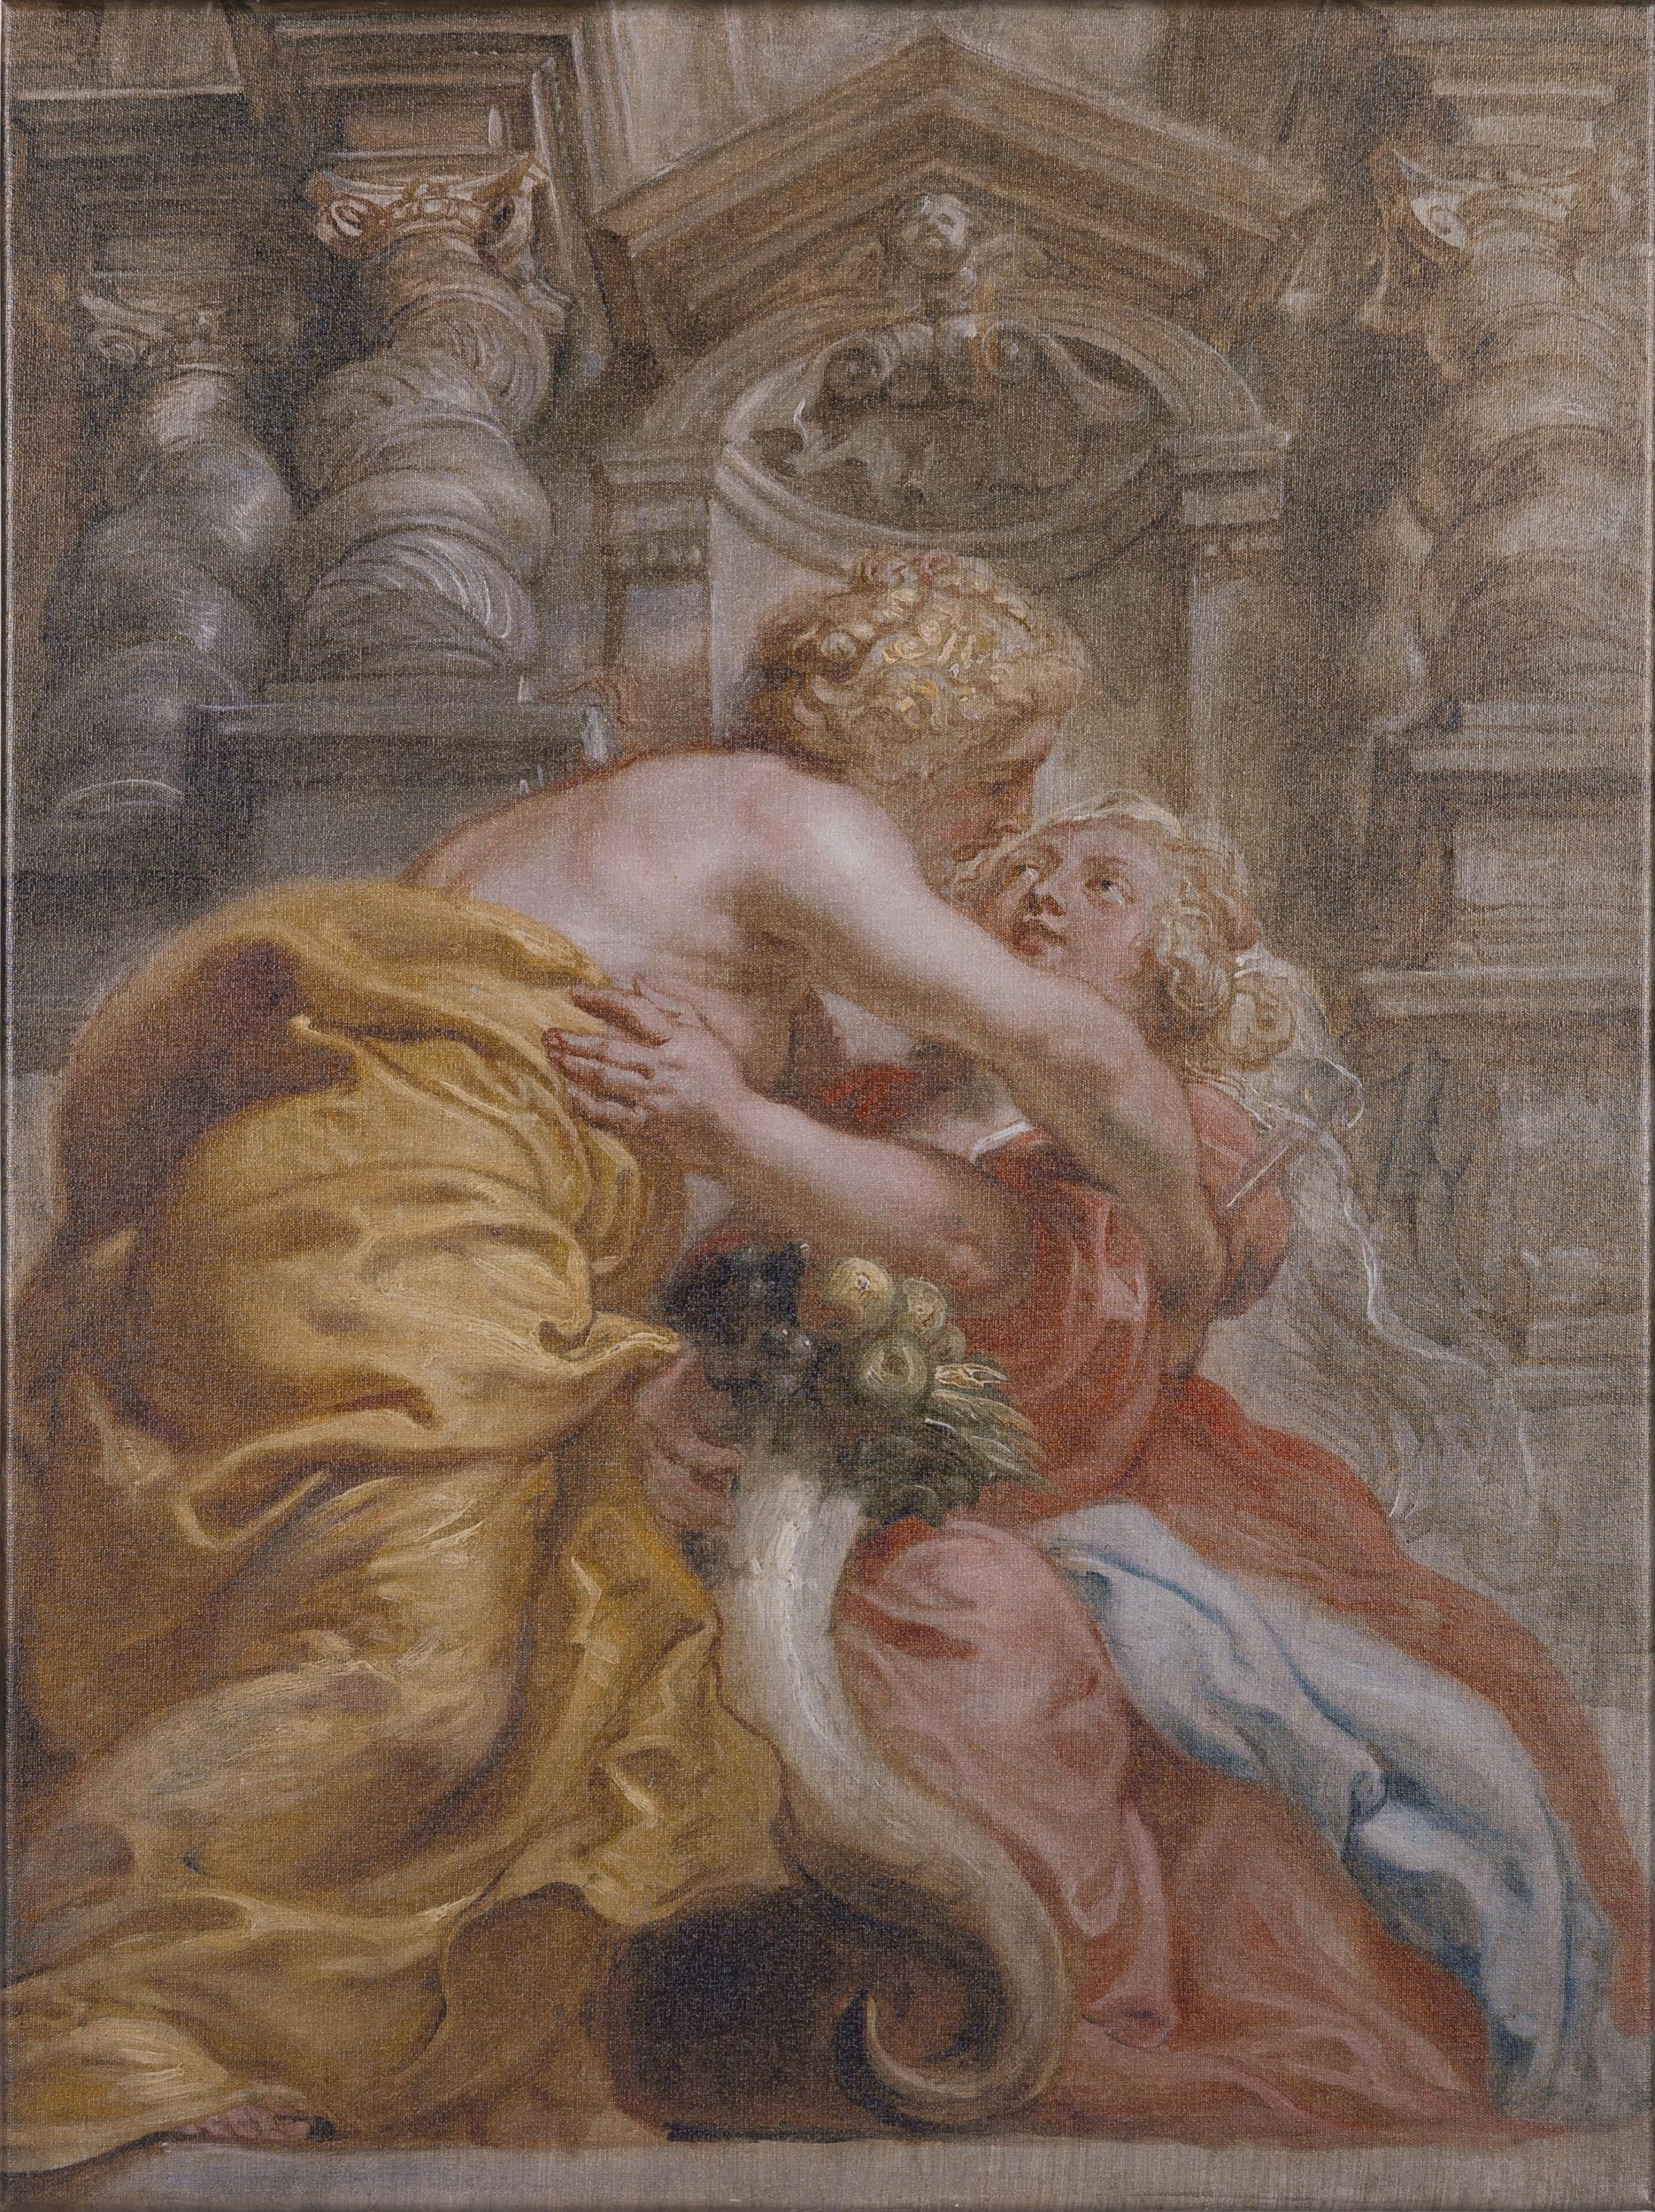 Lithograph on Paper 'Peace Embracing Plenty' (1633-34) by Peter Paul Rubens. Dimensions 61x46cm. "